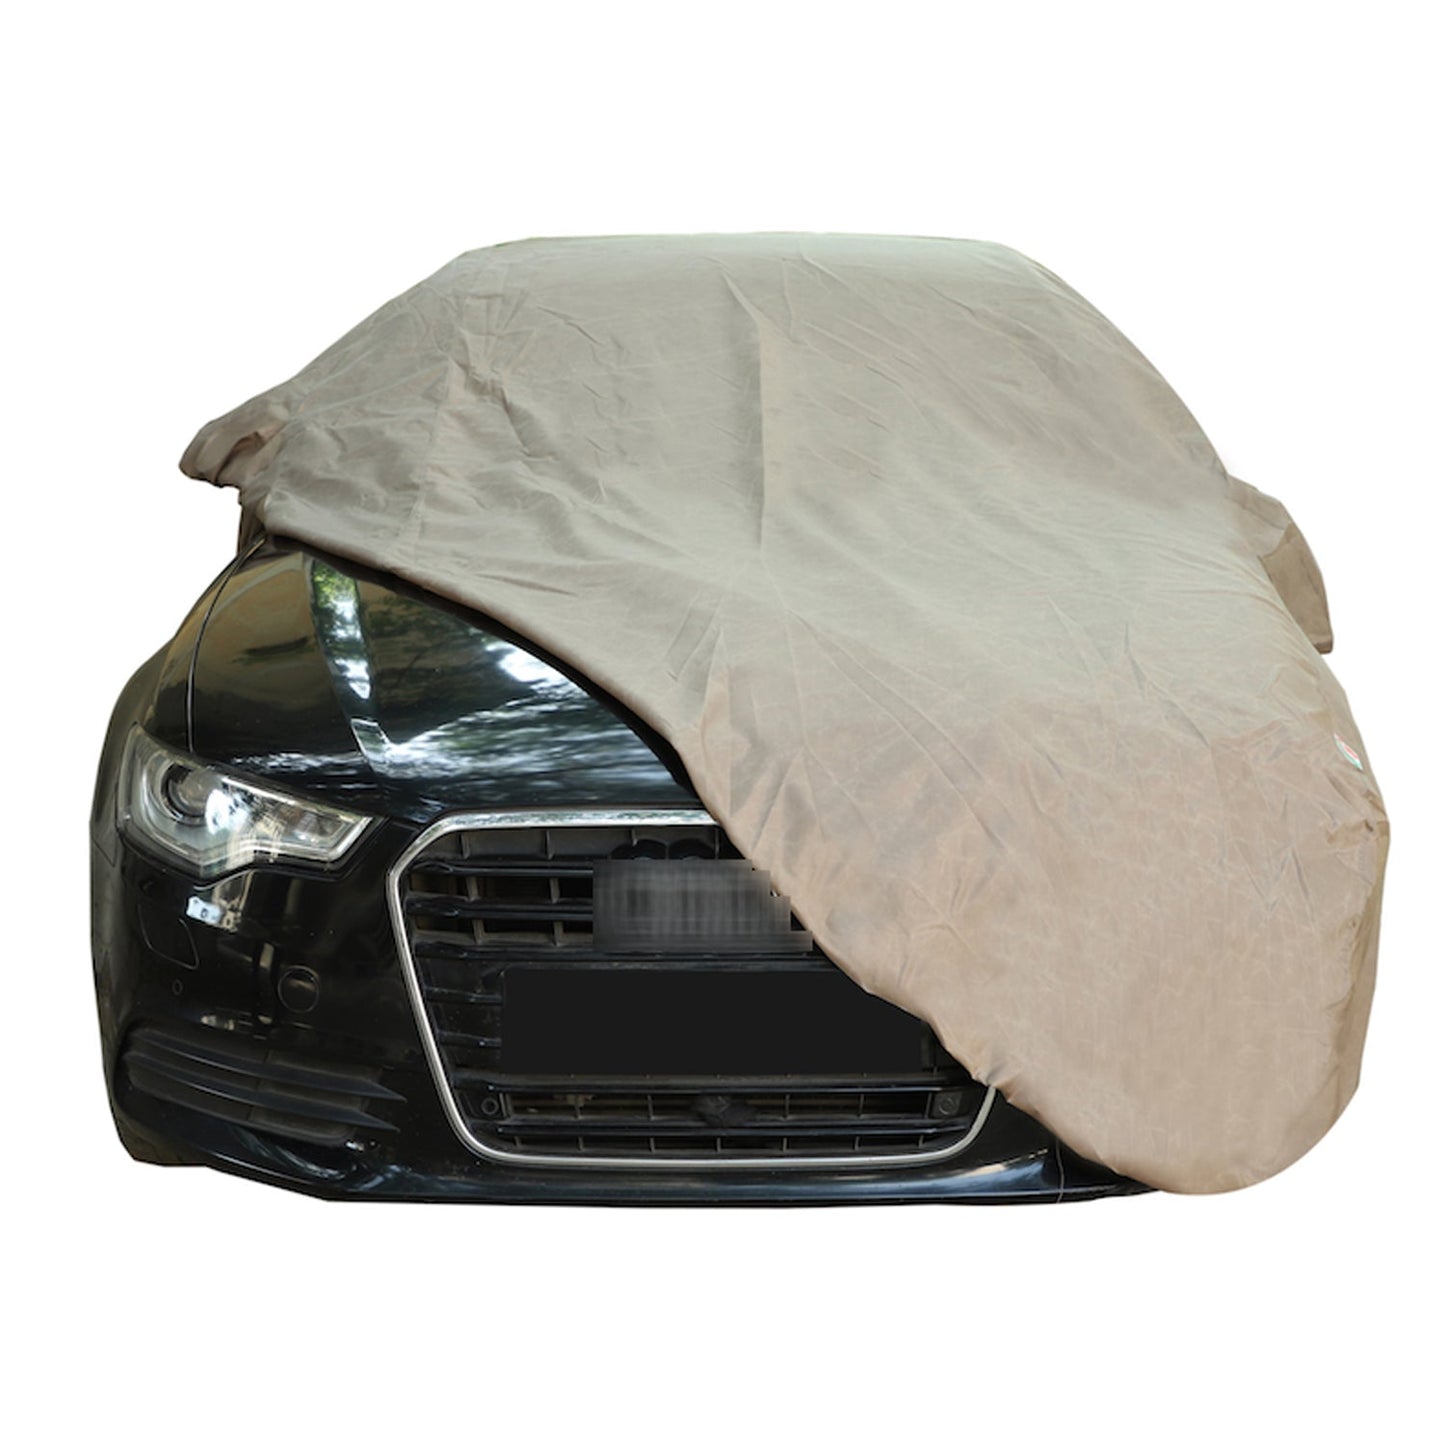 Oshotto Brown 100% Waterproof Car Body Cover with Mirror Pockets For Chevrolet Captiva